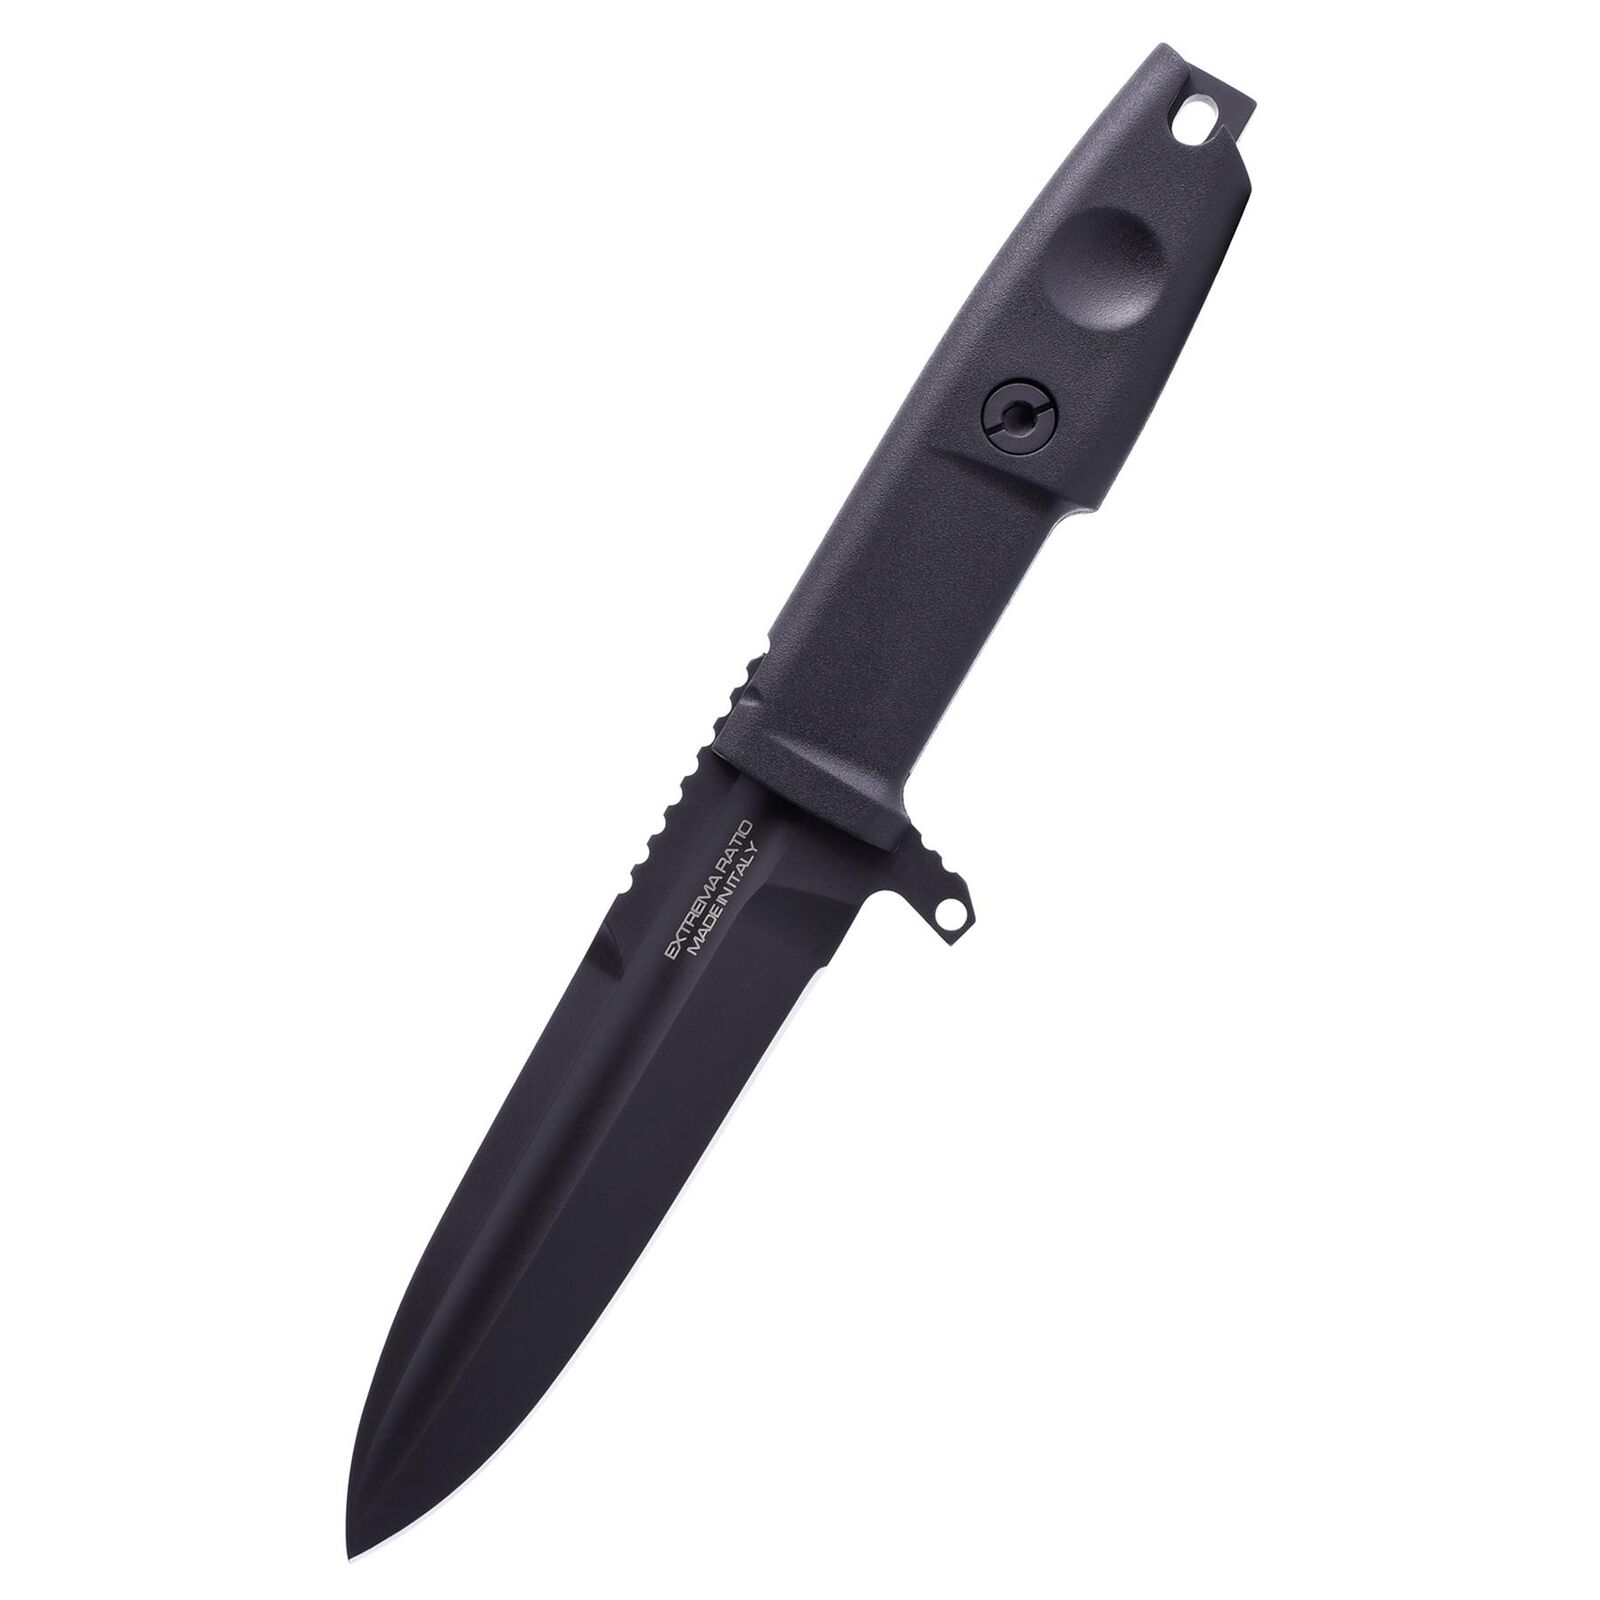 Extrema Ratio DEFENDER 2 combat fixed blade knife N690 steel drop point shape